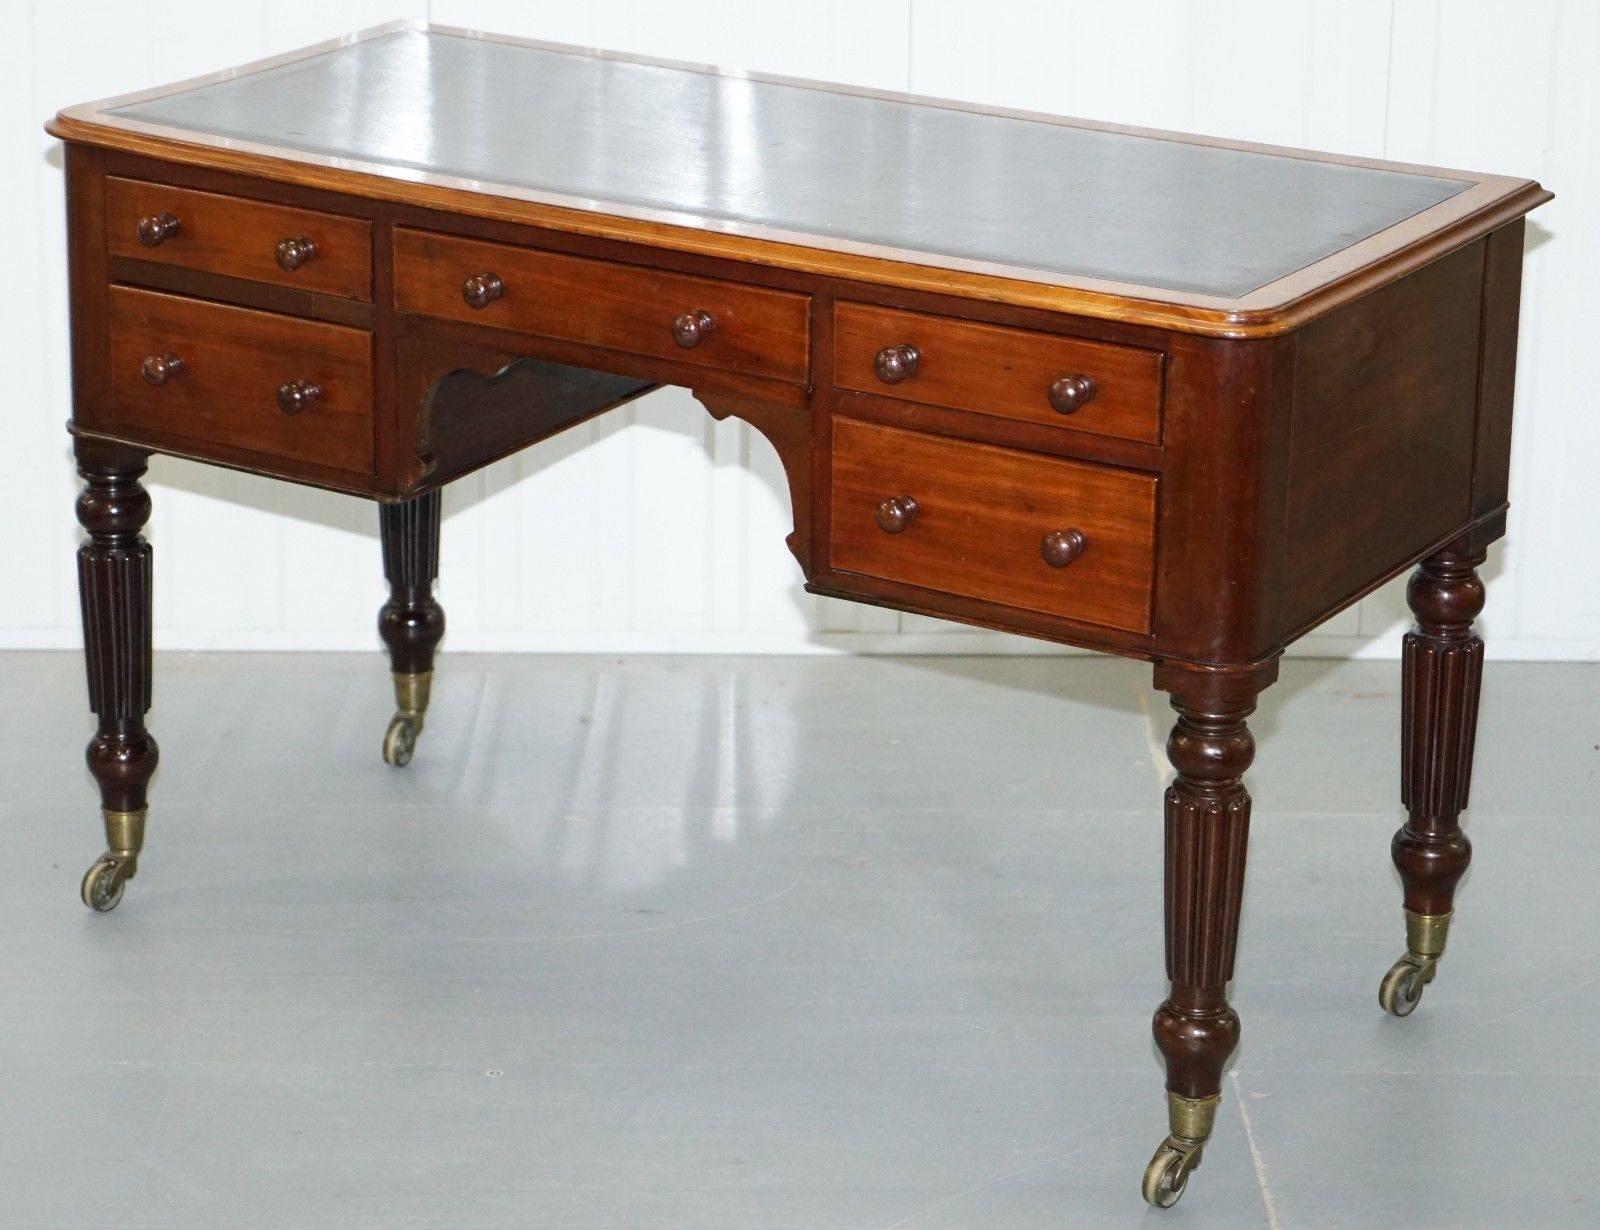 We are delighted to offer for sale this lovely period Victorian handmade in England in the manor of Gillows mahogany writing desk

Please note the delivery fee listed is just a guide, it covers within the M25 only, for an accurate quote please